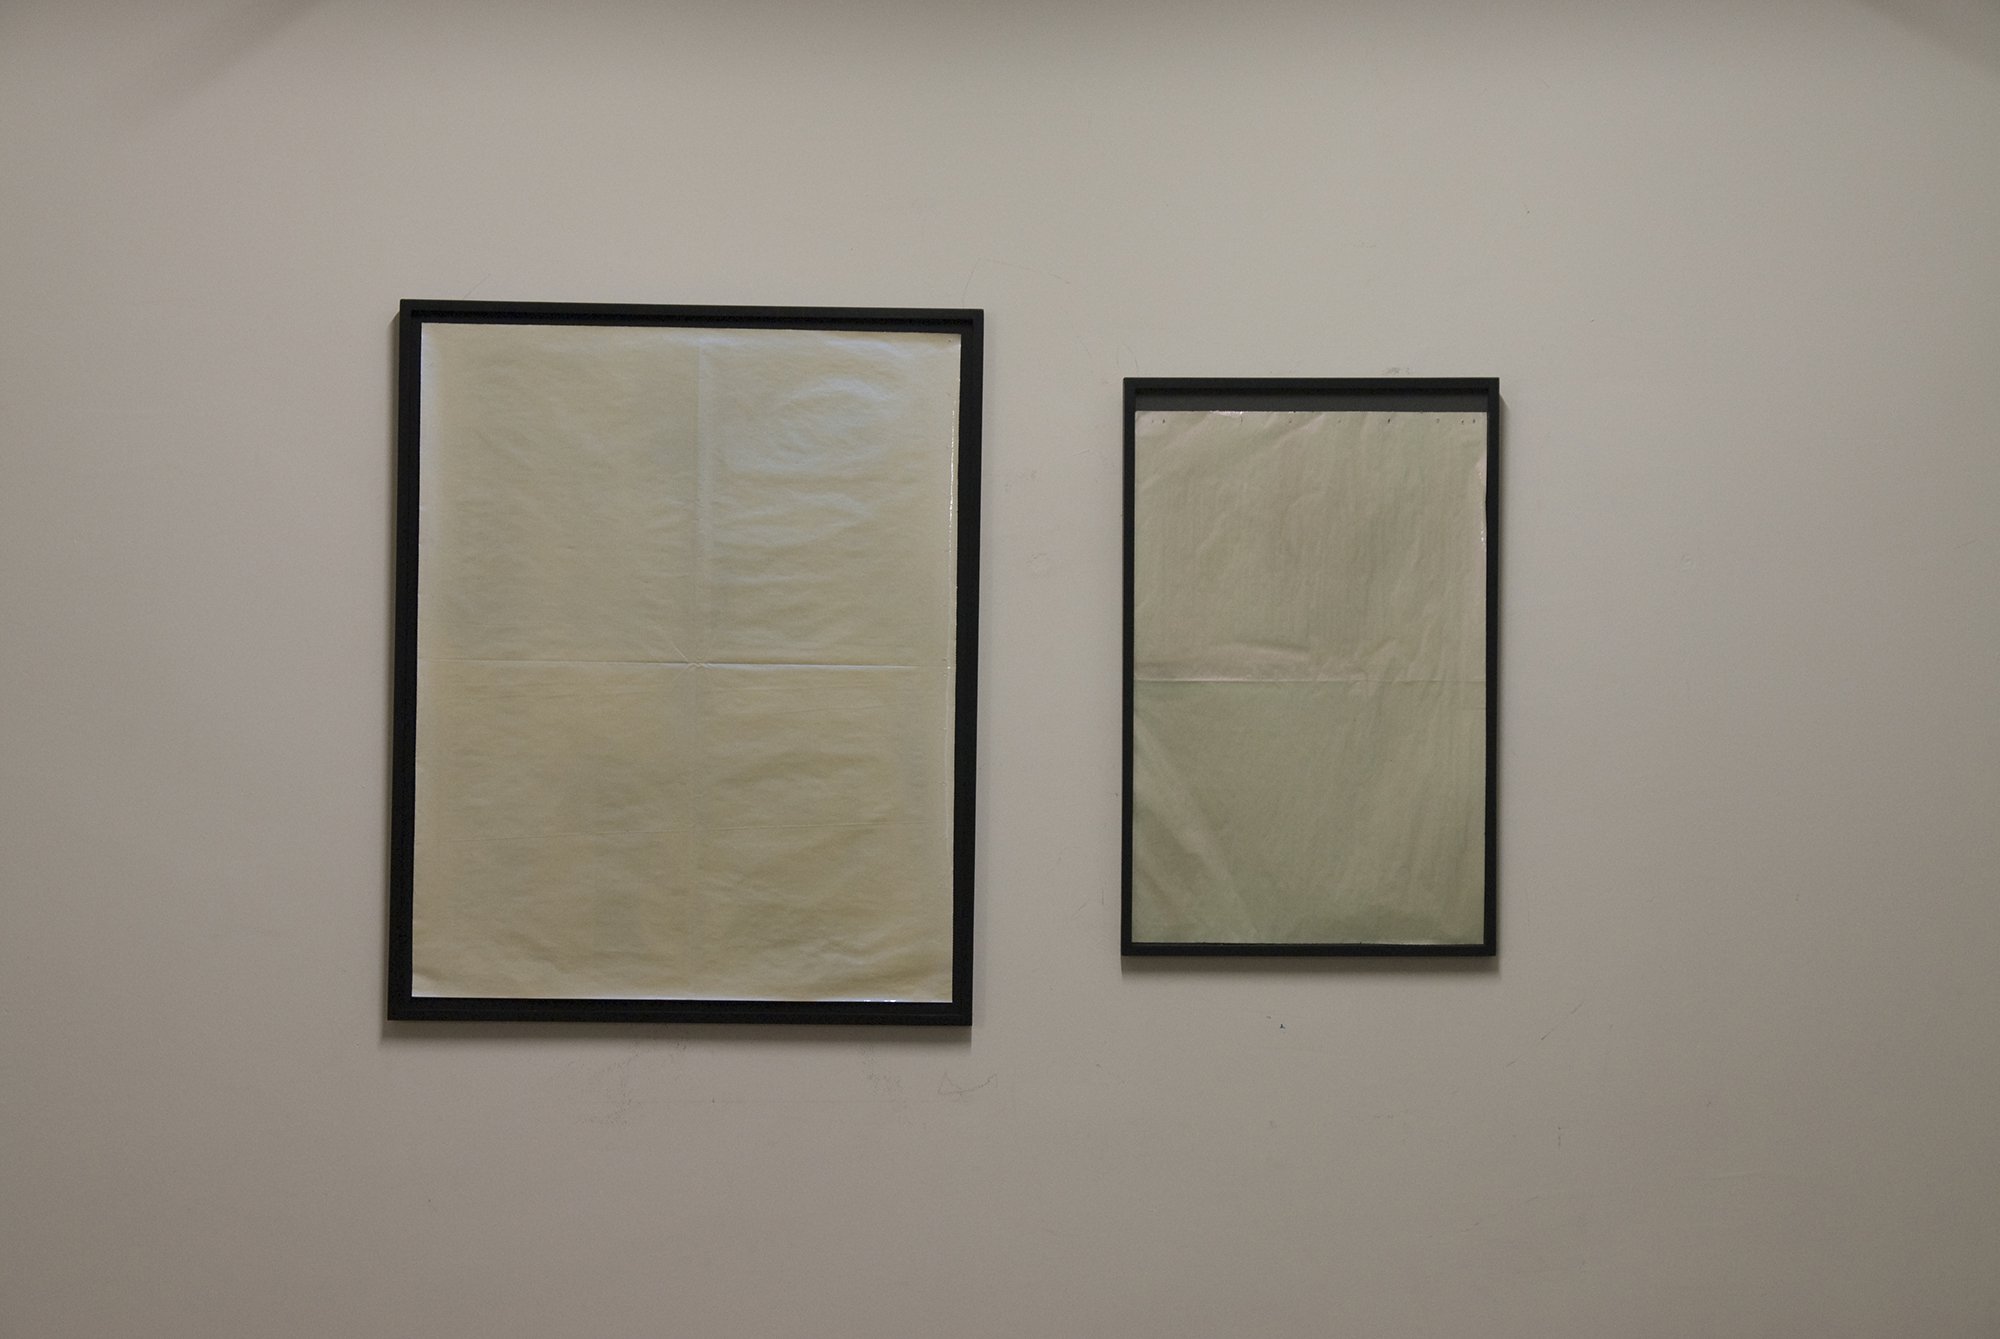 (Left) Eva Weinmayr, The Guardian, car lacquer on newspaper page, 80 x 64.5 cm, 2006. (Right) Eva Weinmayr, The Daily Star, car lacquer on newspaper page, 64.5 x 42 cm, 2006. Installation view, I Like The Truth, I Never Liked Fiction (and vice versa), Rodeo, Istanbul, 2009